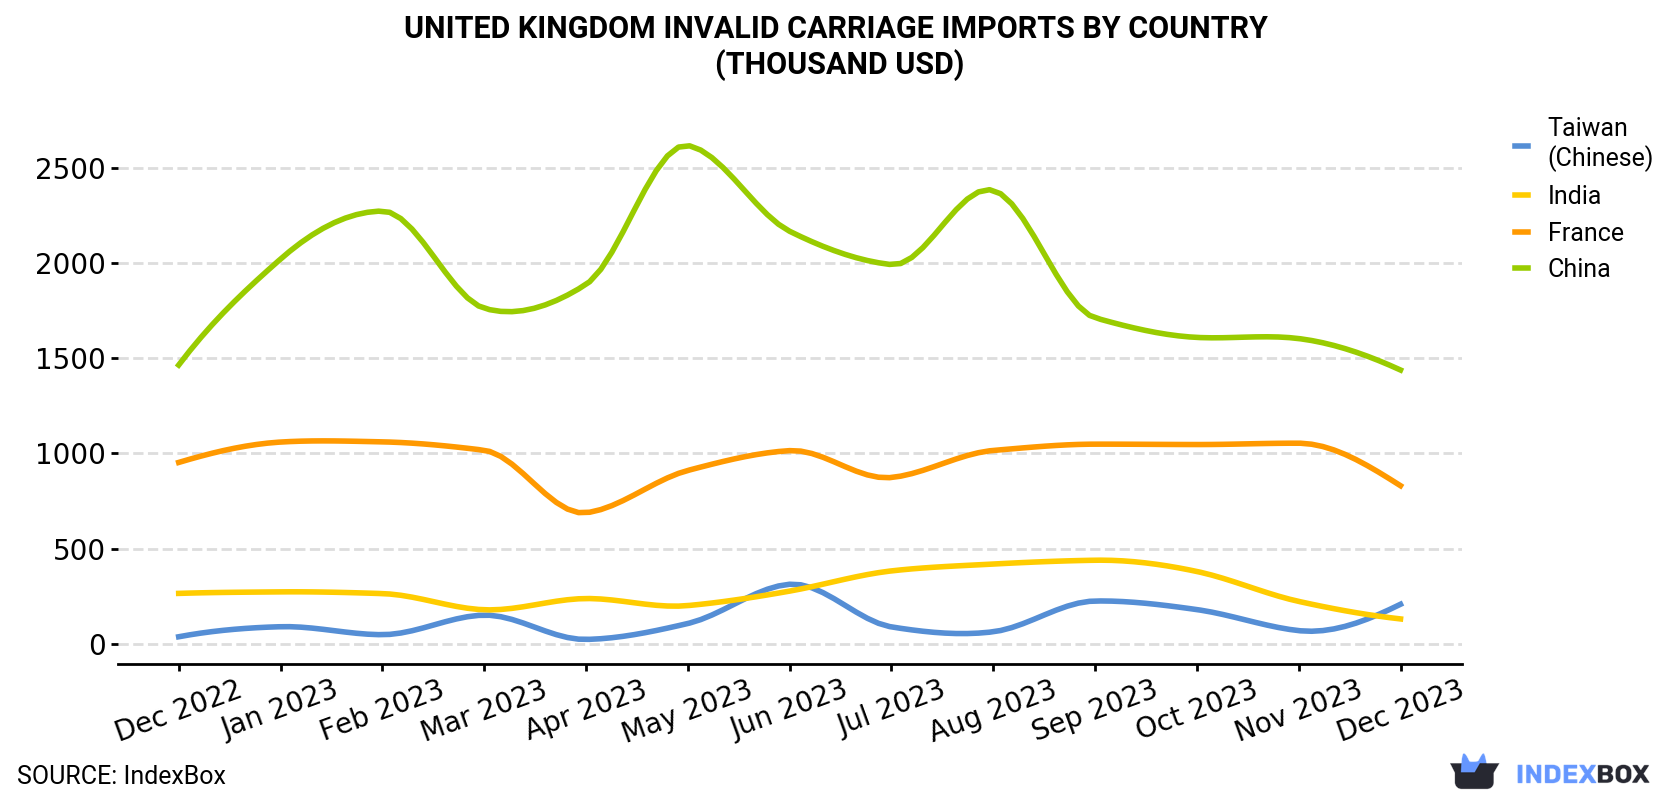 United Kingdom Invalid Carriage Imports By Country (Thousand USD)